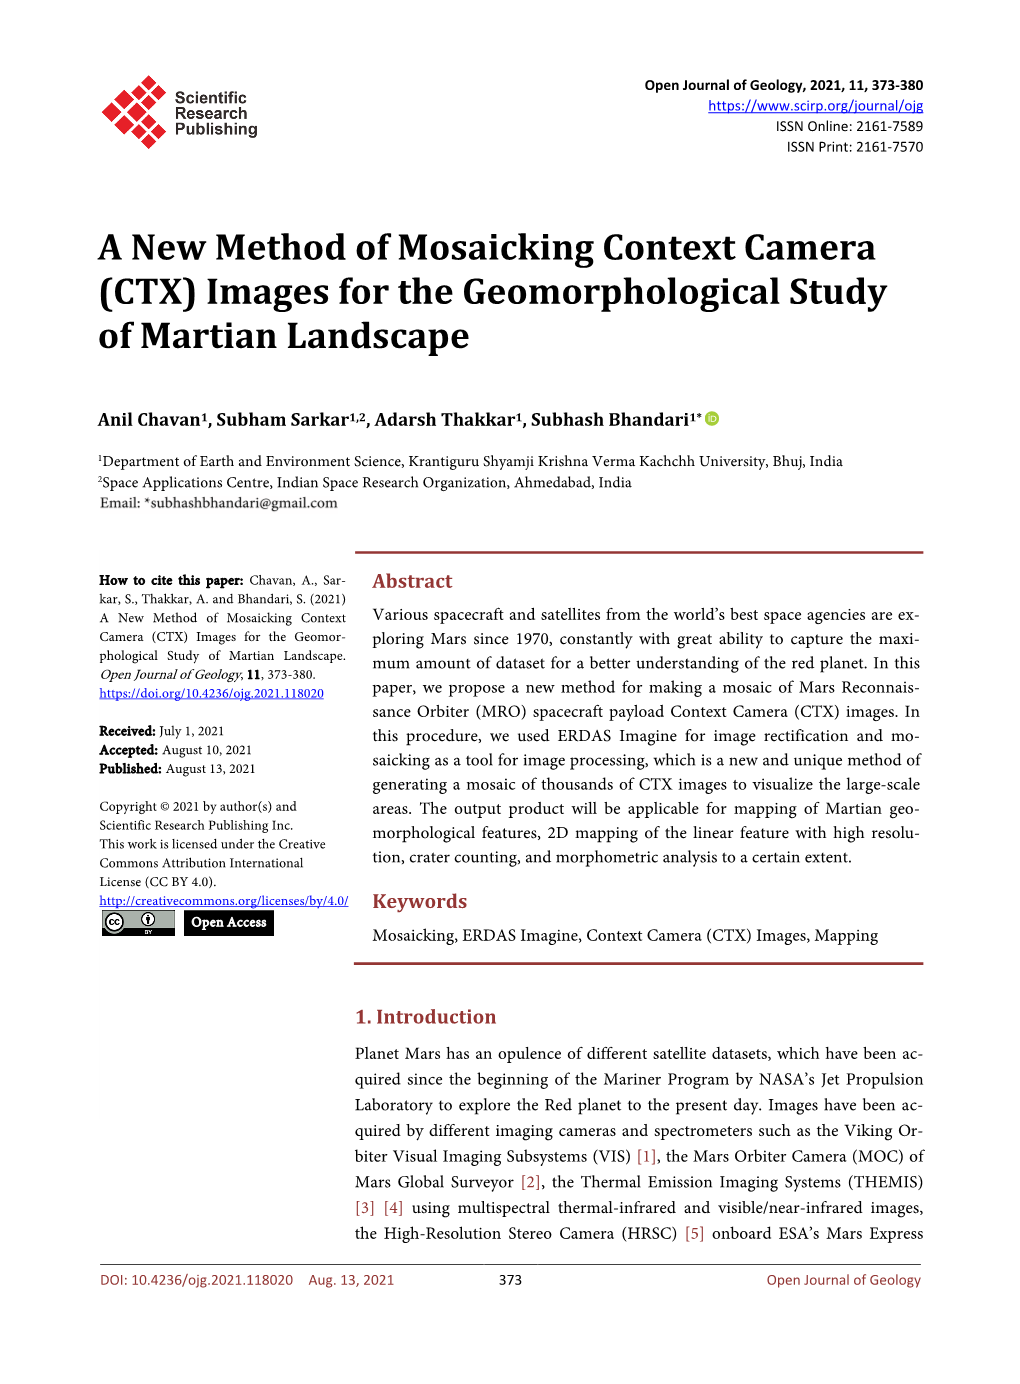 A New Method of Mosaicking Context Camera (CTX) Images for the Geomorphological Study of Martian Landscape